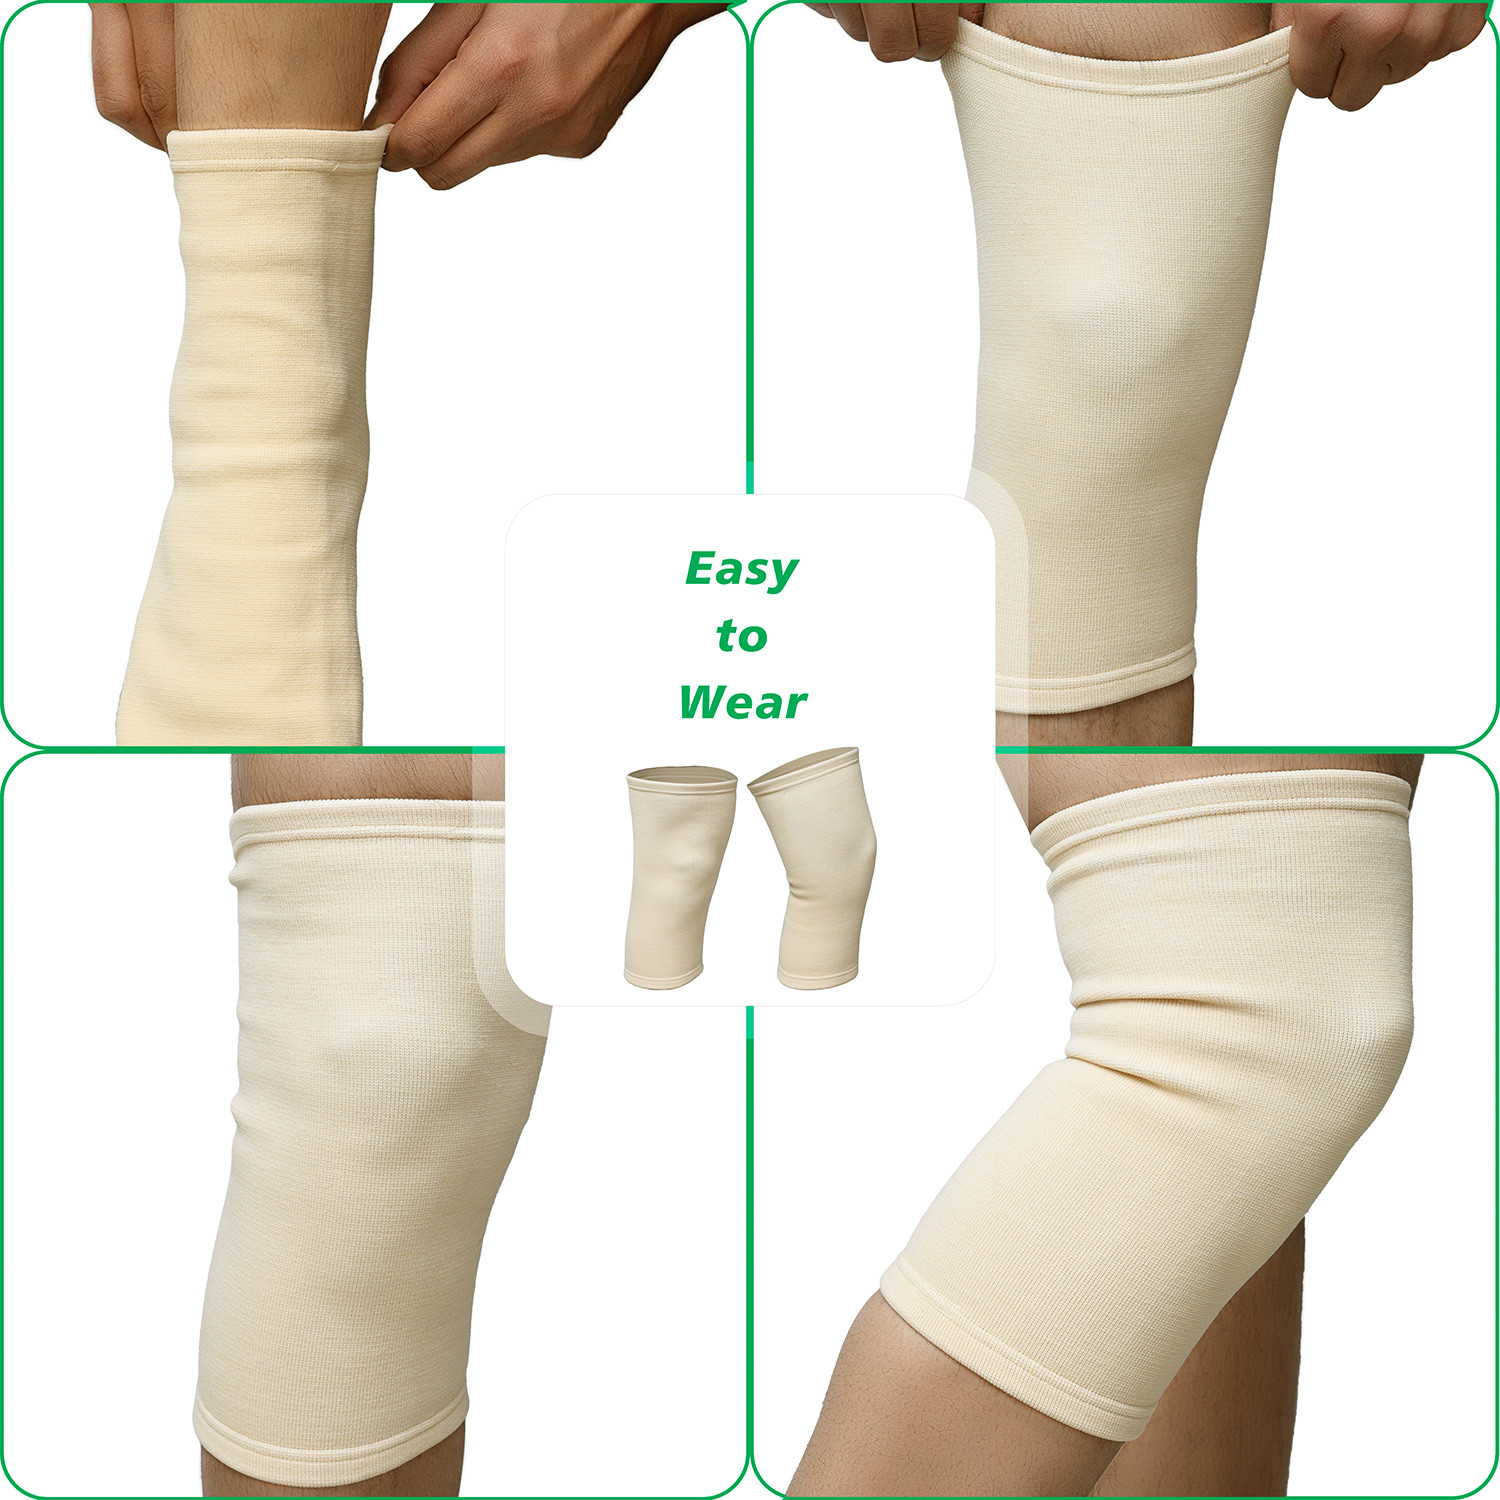 Kuber Industries Knee Cap | Cotton 4 Way Compression Knee Sleeves |Sleeves For Joint Pain | Sleeves For Arthritis Relief | Unisex Knee Wraps | Knee Bands |Size-S|1 Pair|Cream